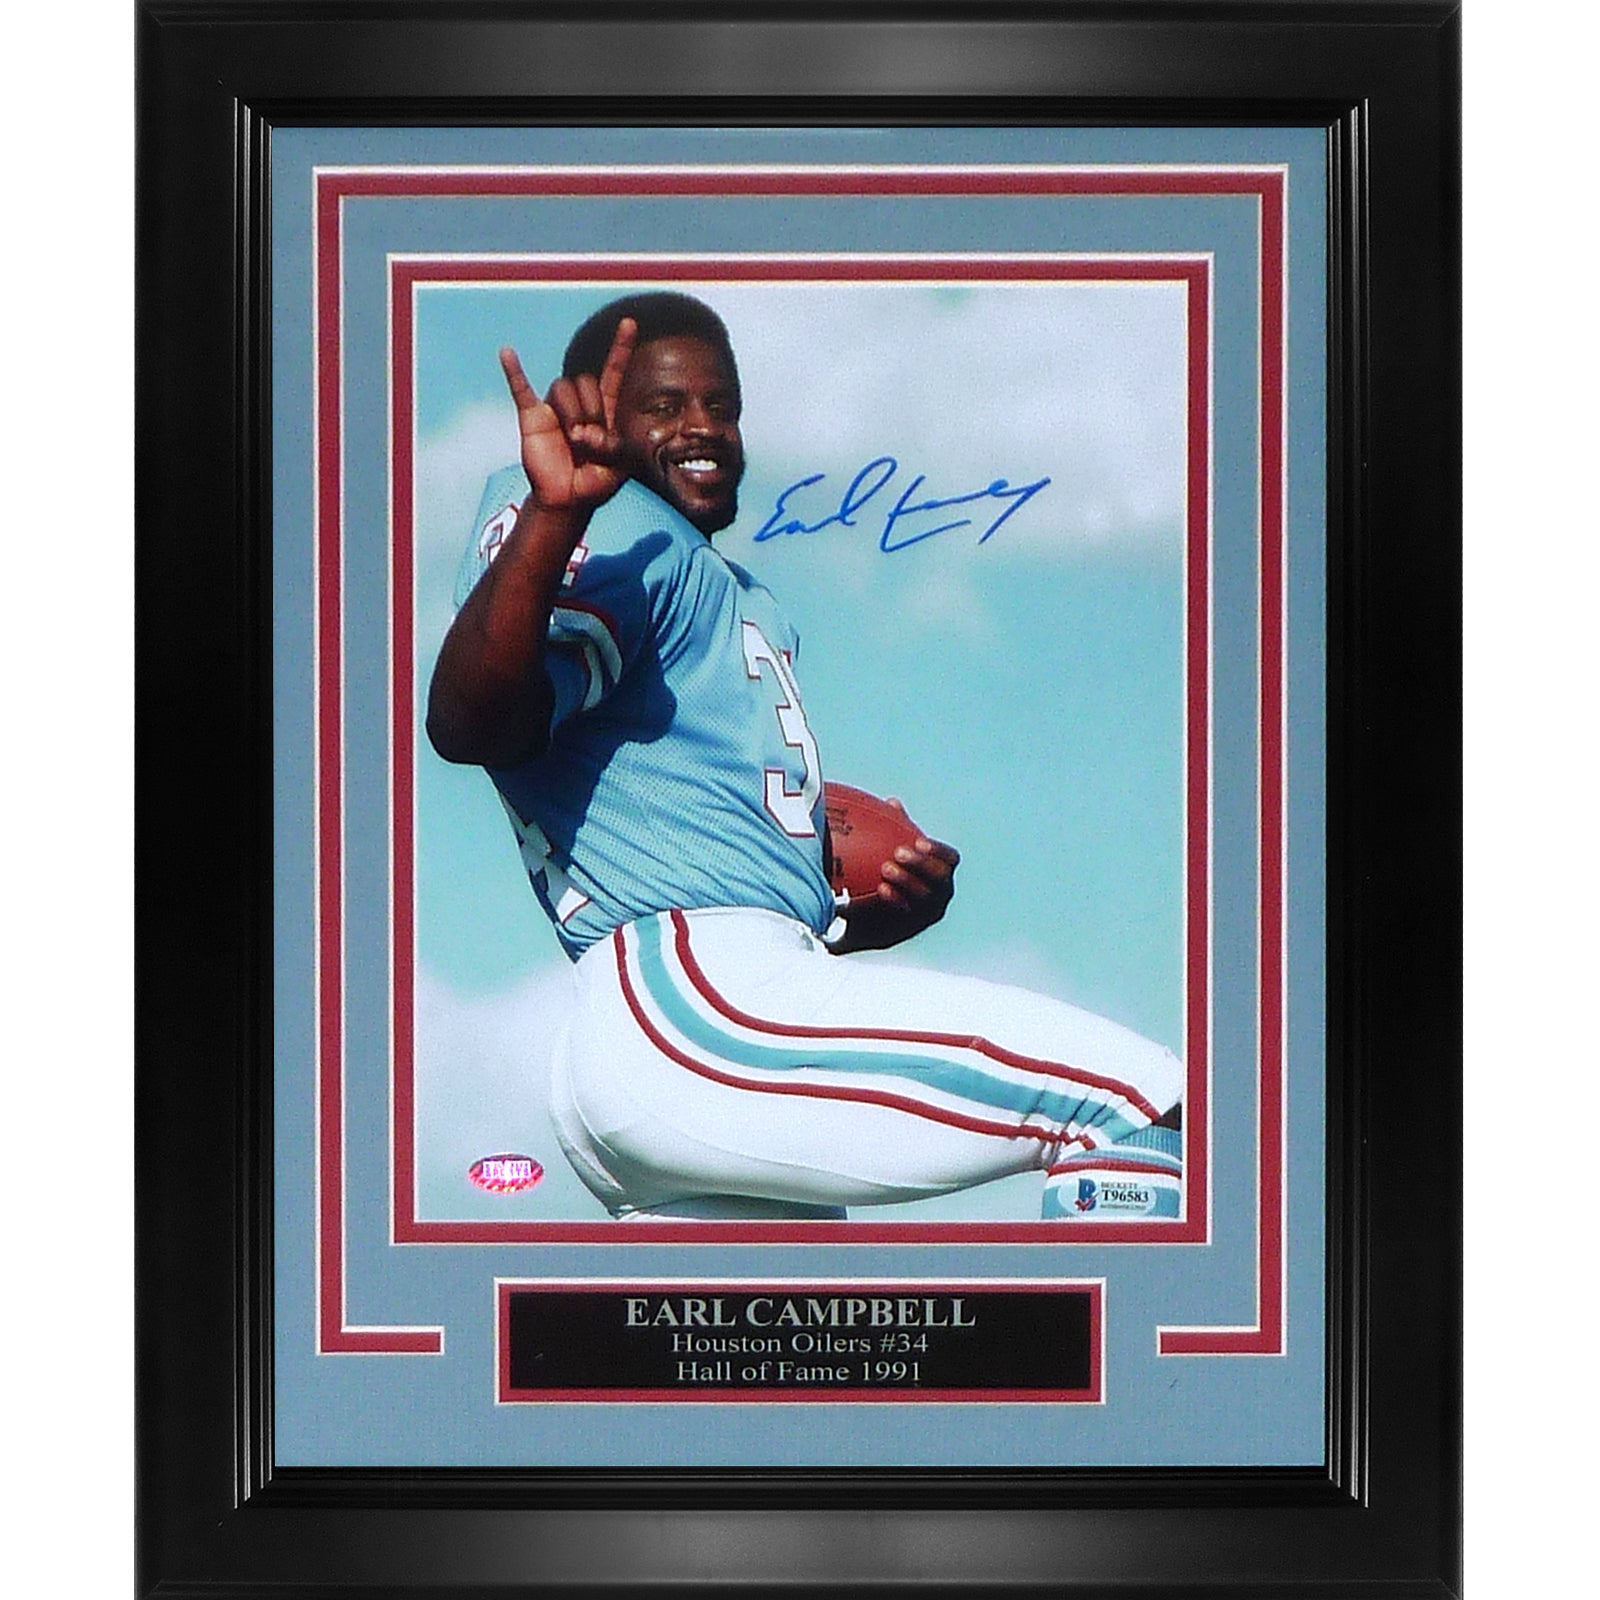 Earl Campbell Autographed Houston Oilers (Vertical Pose) Deluxe Framed 8x10 Photo